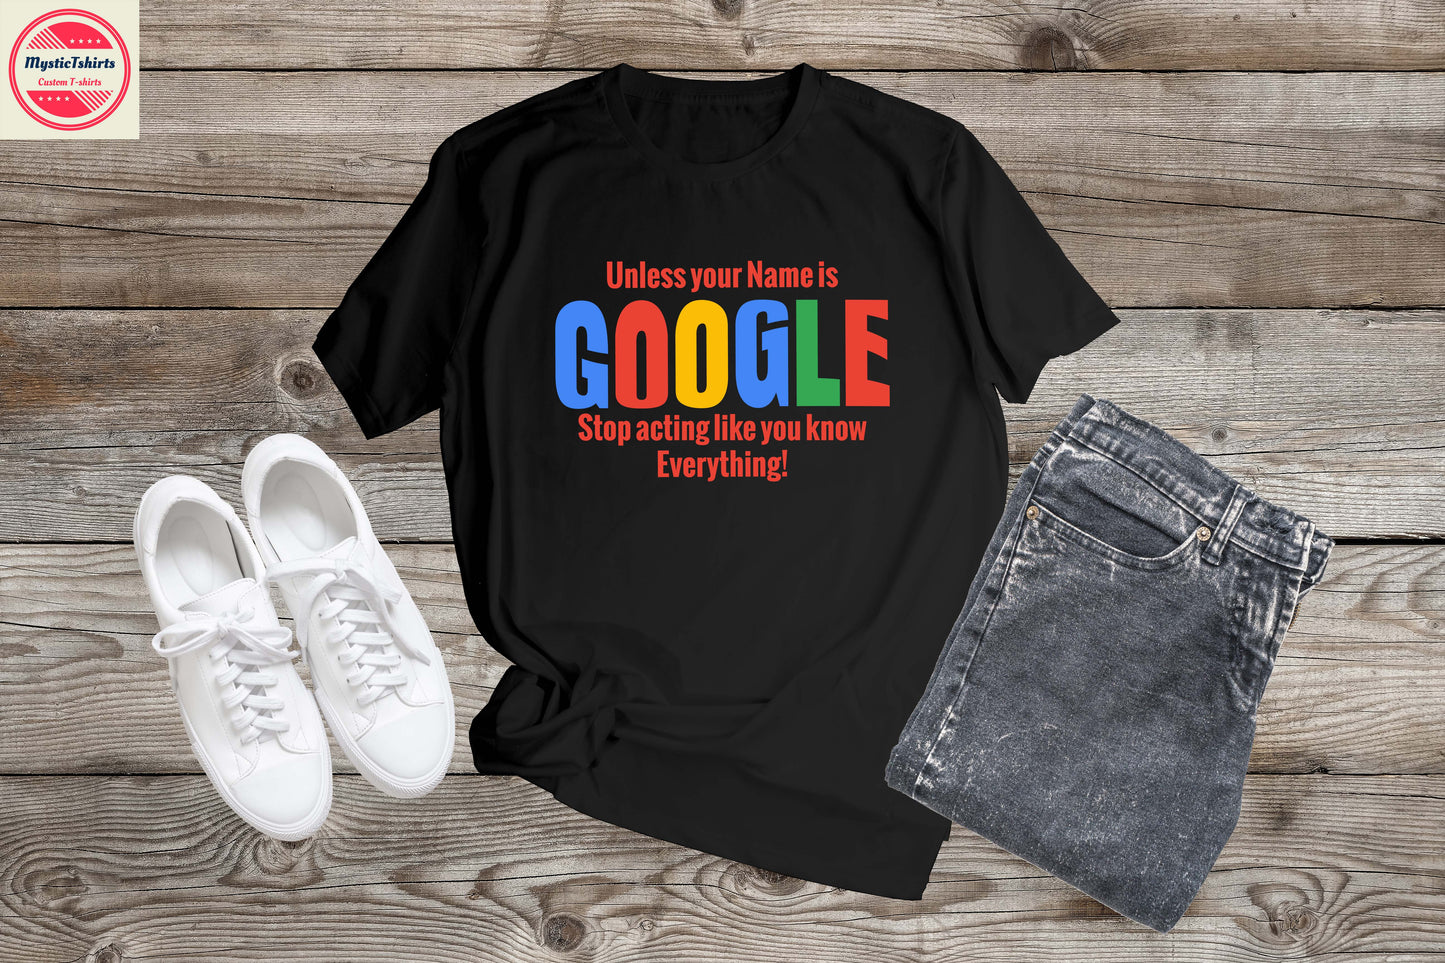 470. UNLESS YOUR NAME IS GOOGLE STOP ACTING LIKE YOU KNOW EVERYTHING, Custom Made Shirt, Personalized T-Shirt, Custom Text, Make Your Own Shirt, Custom Tee